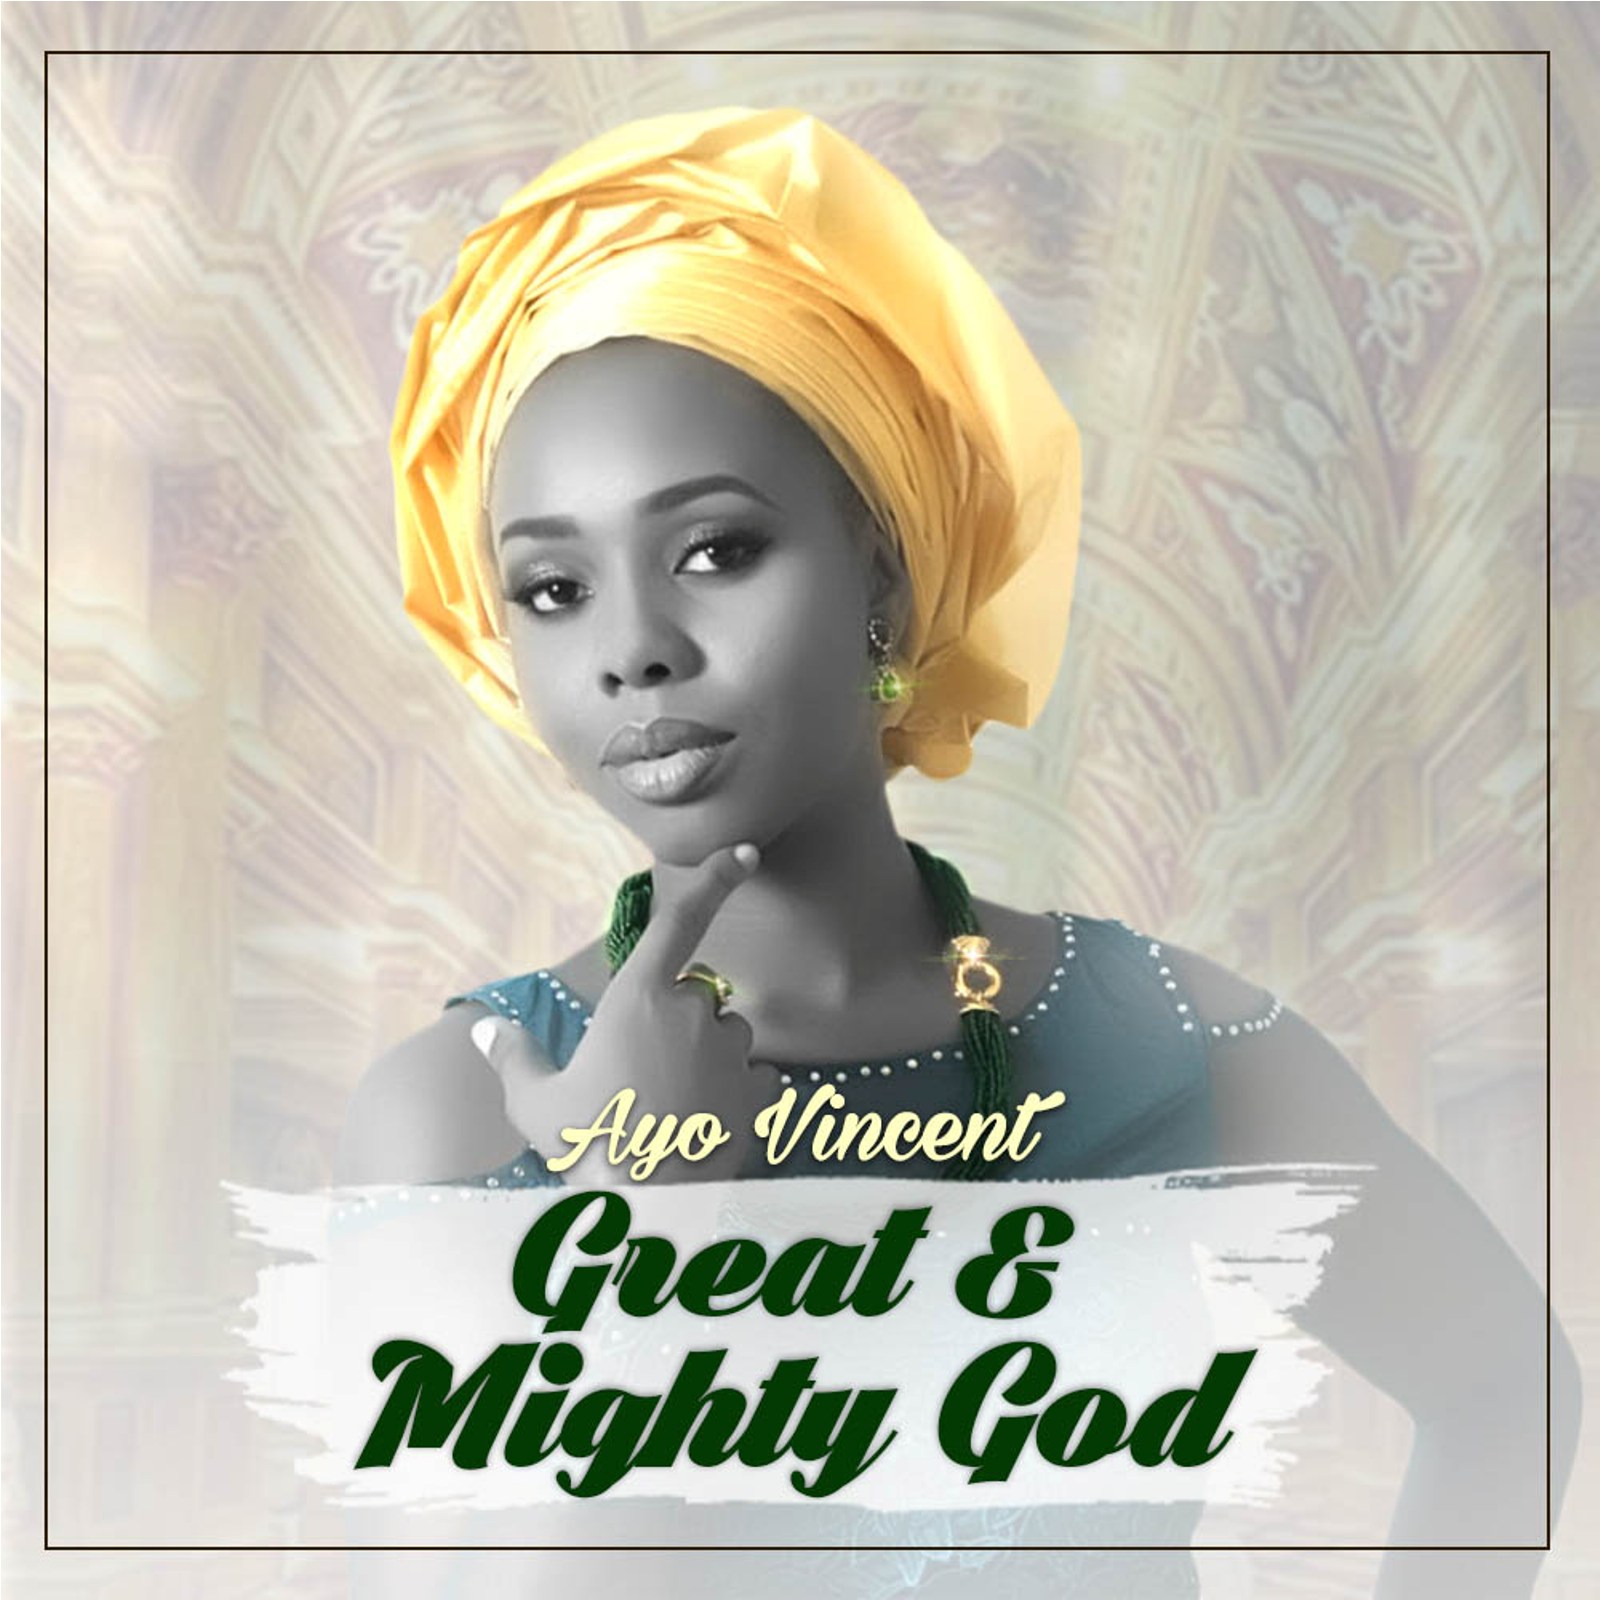 You are Great - Ayo Vincent lyrics